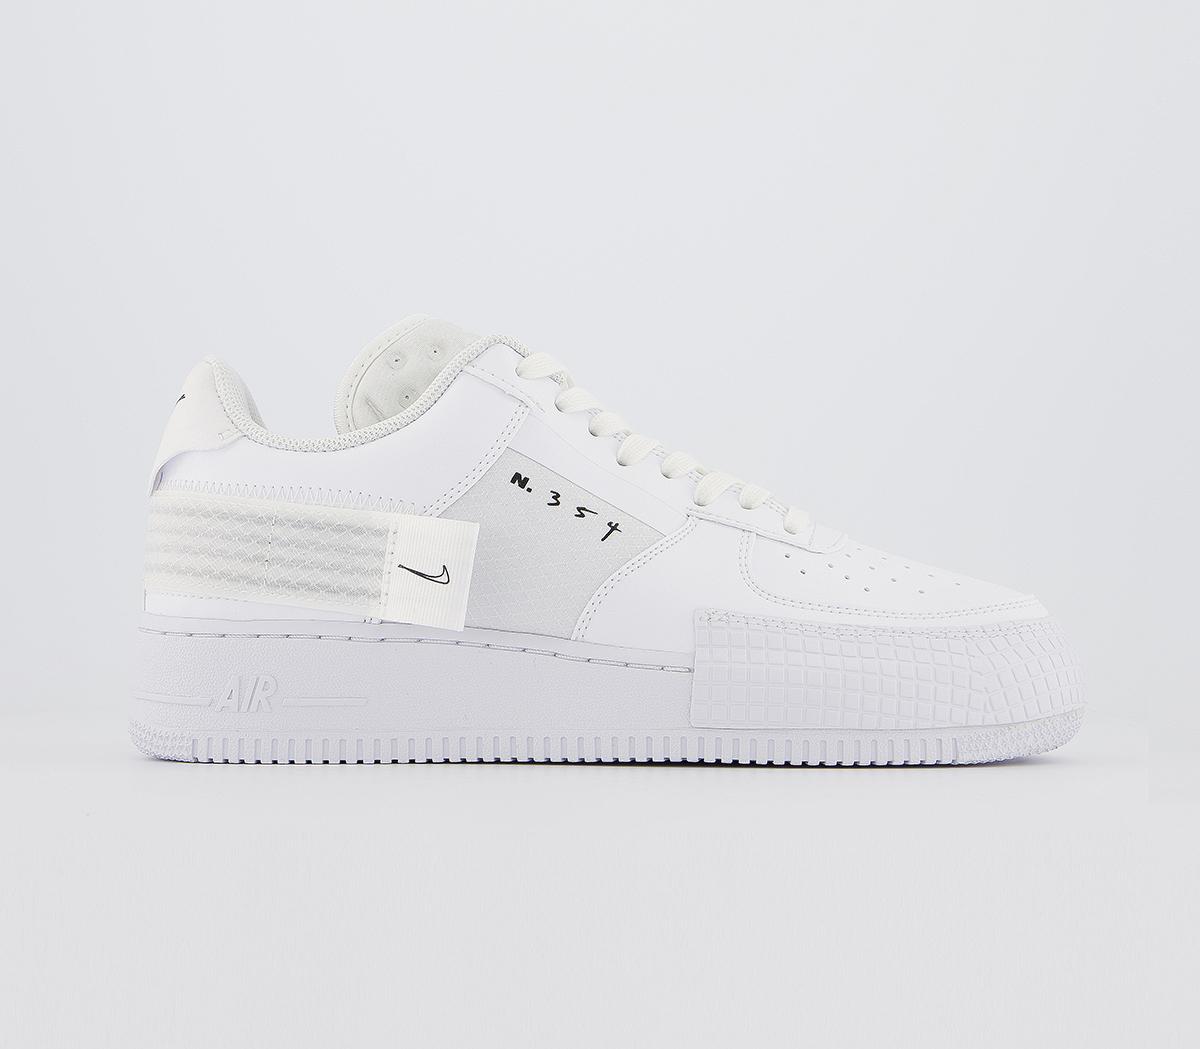 air force 1 type black and white